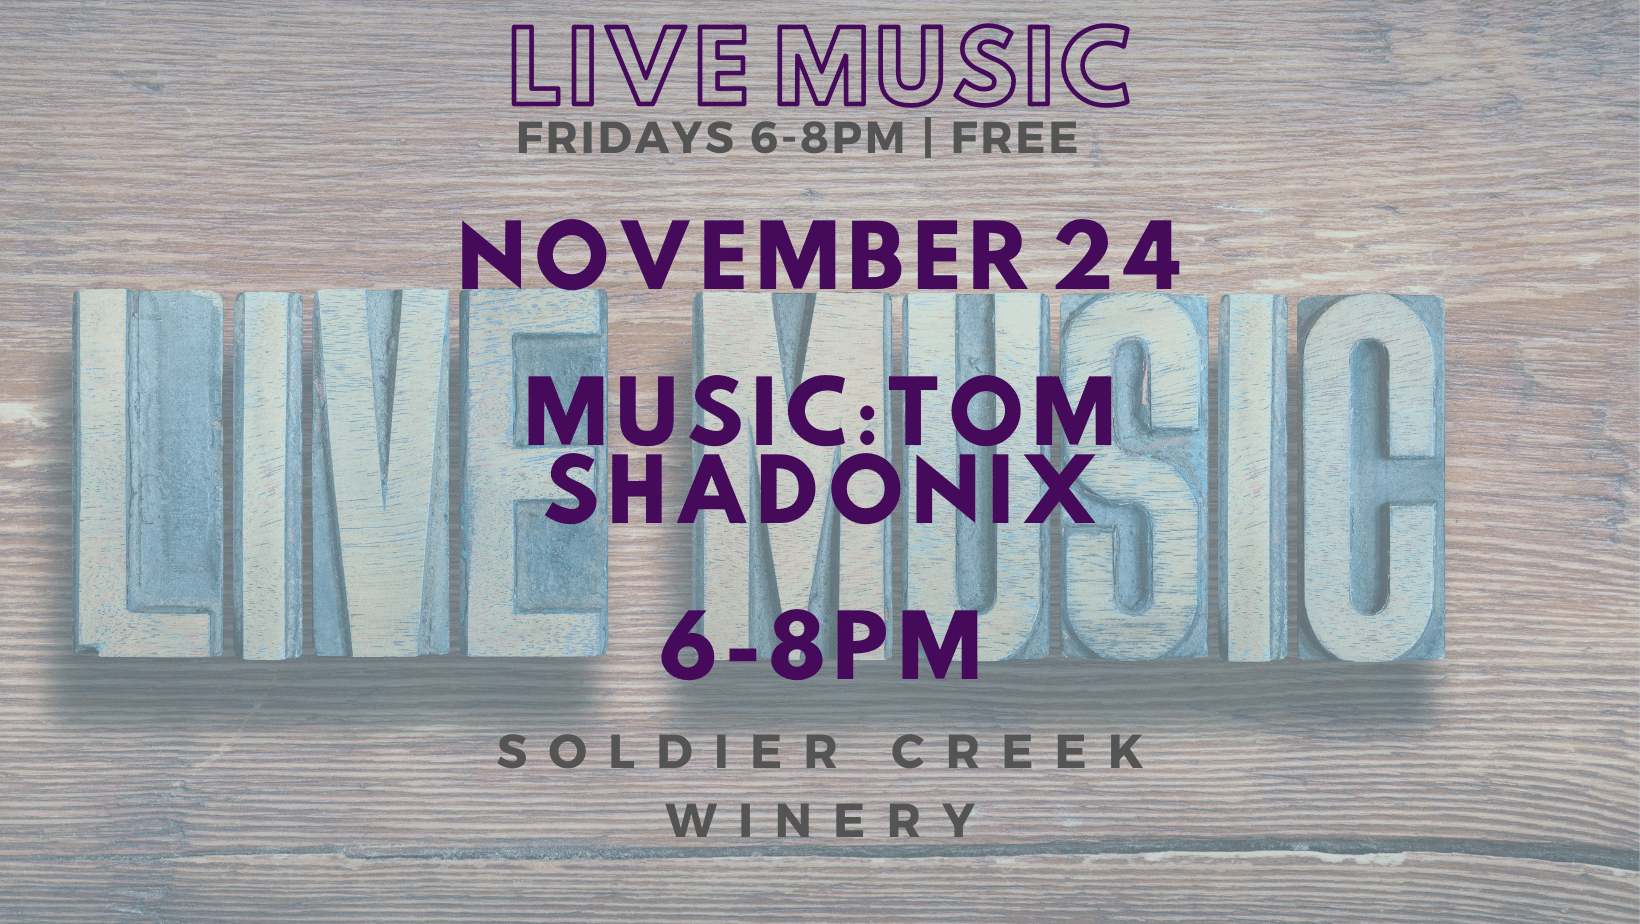 live music at soldier creek winery every friday, november 24 is tom shadonix from 6-8pm. free to listen!